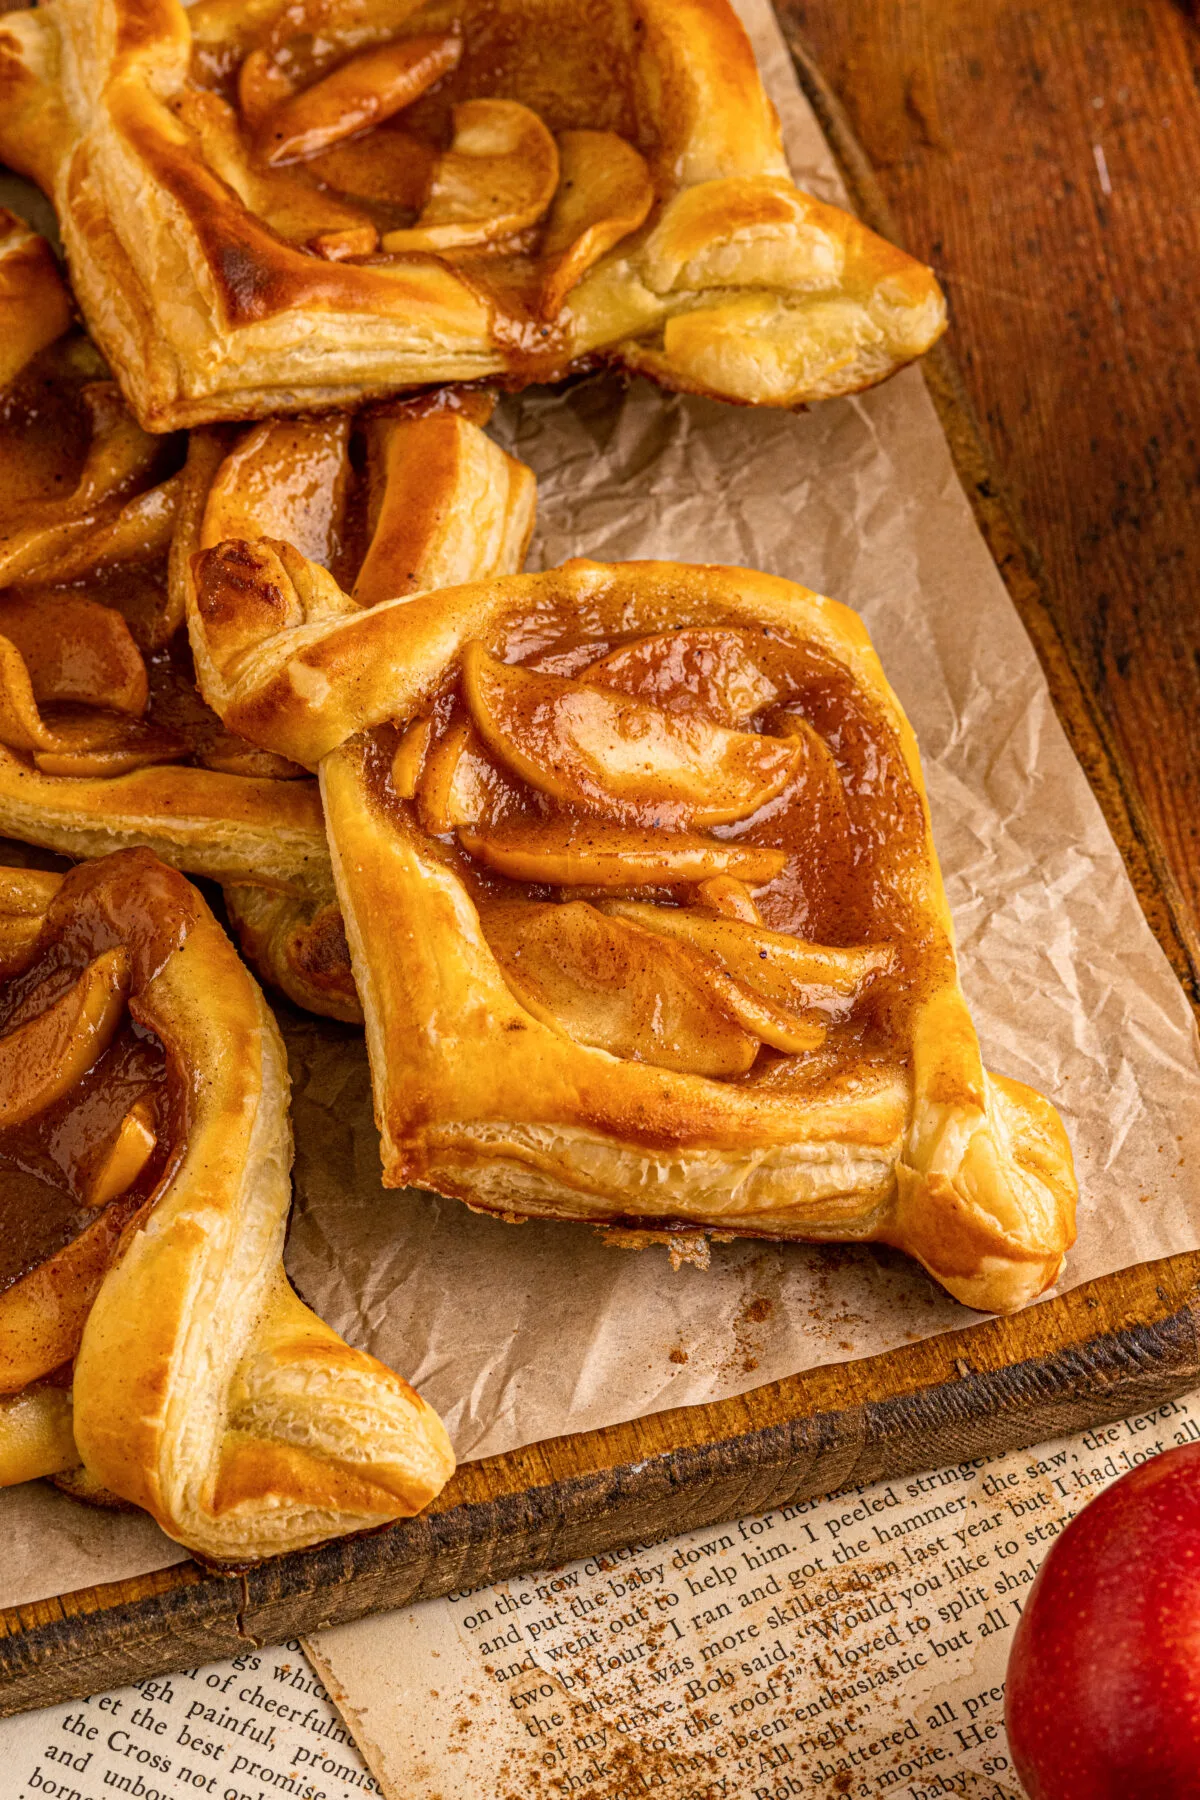 Treat your friends and family to a delicious homemade apple danish! Get the step-by-step recipe with an easy from scratch filling.